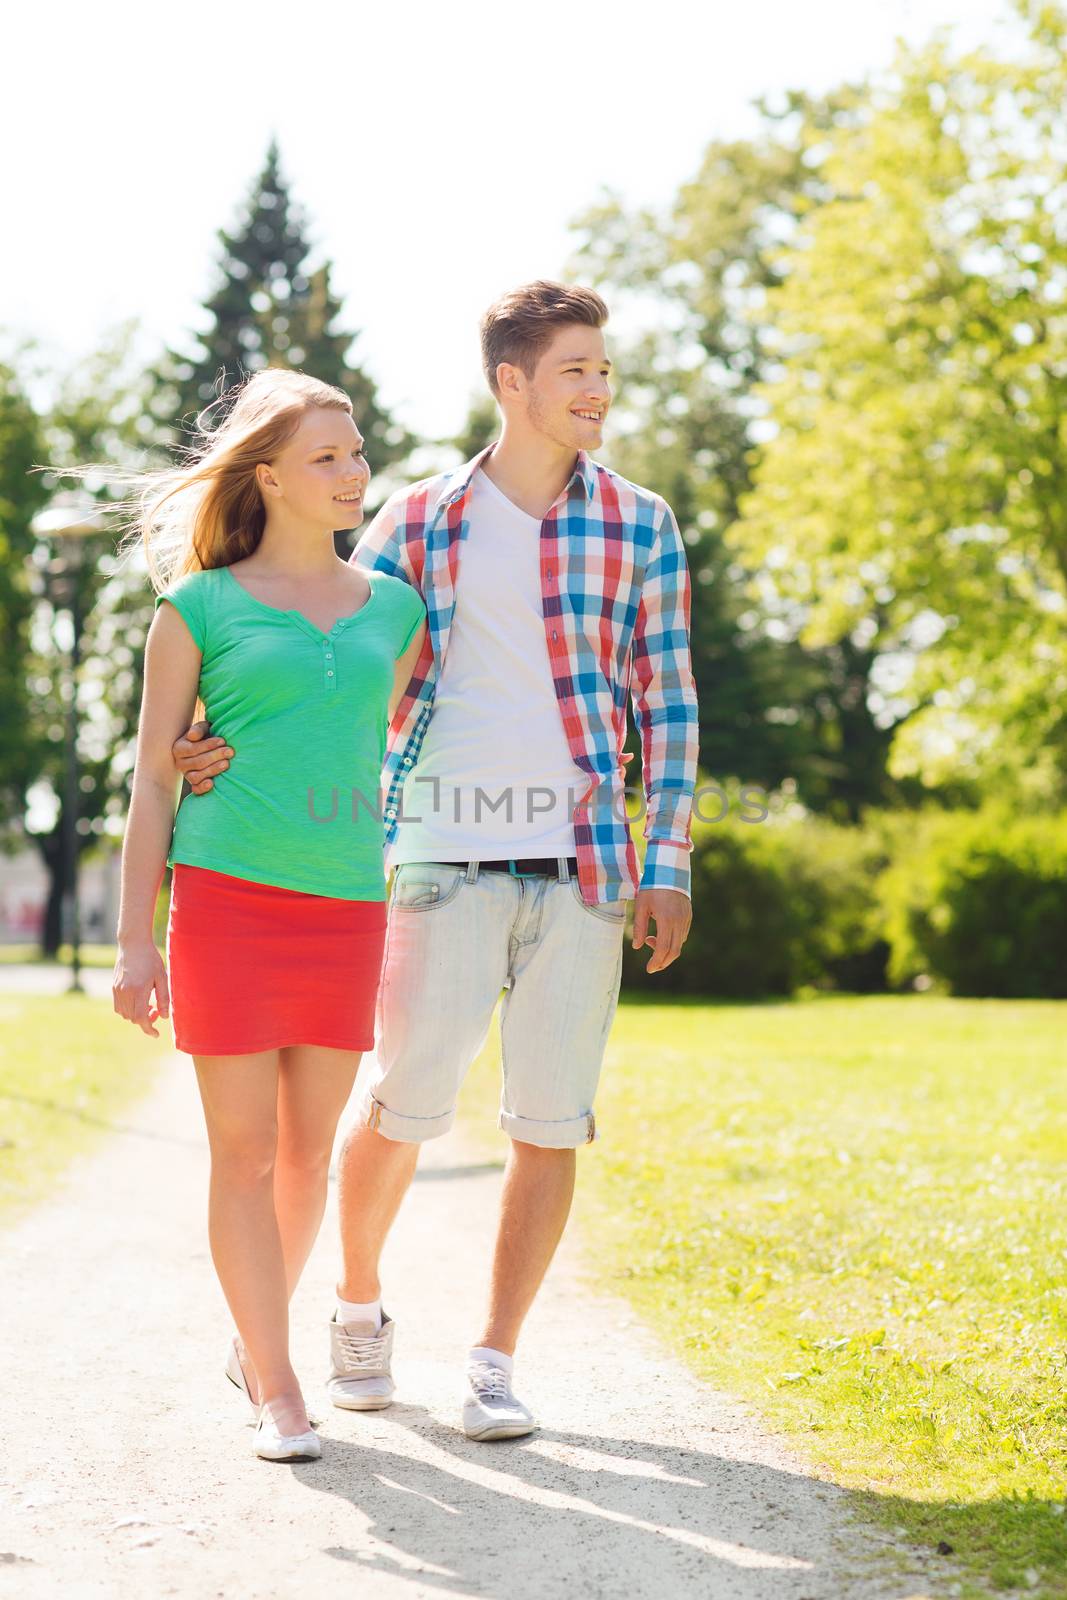 holidays, vacation, love and friendship concept - smiling couple walking in park